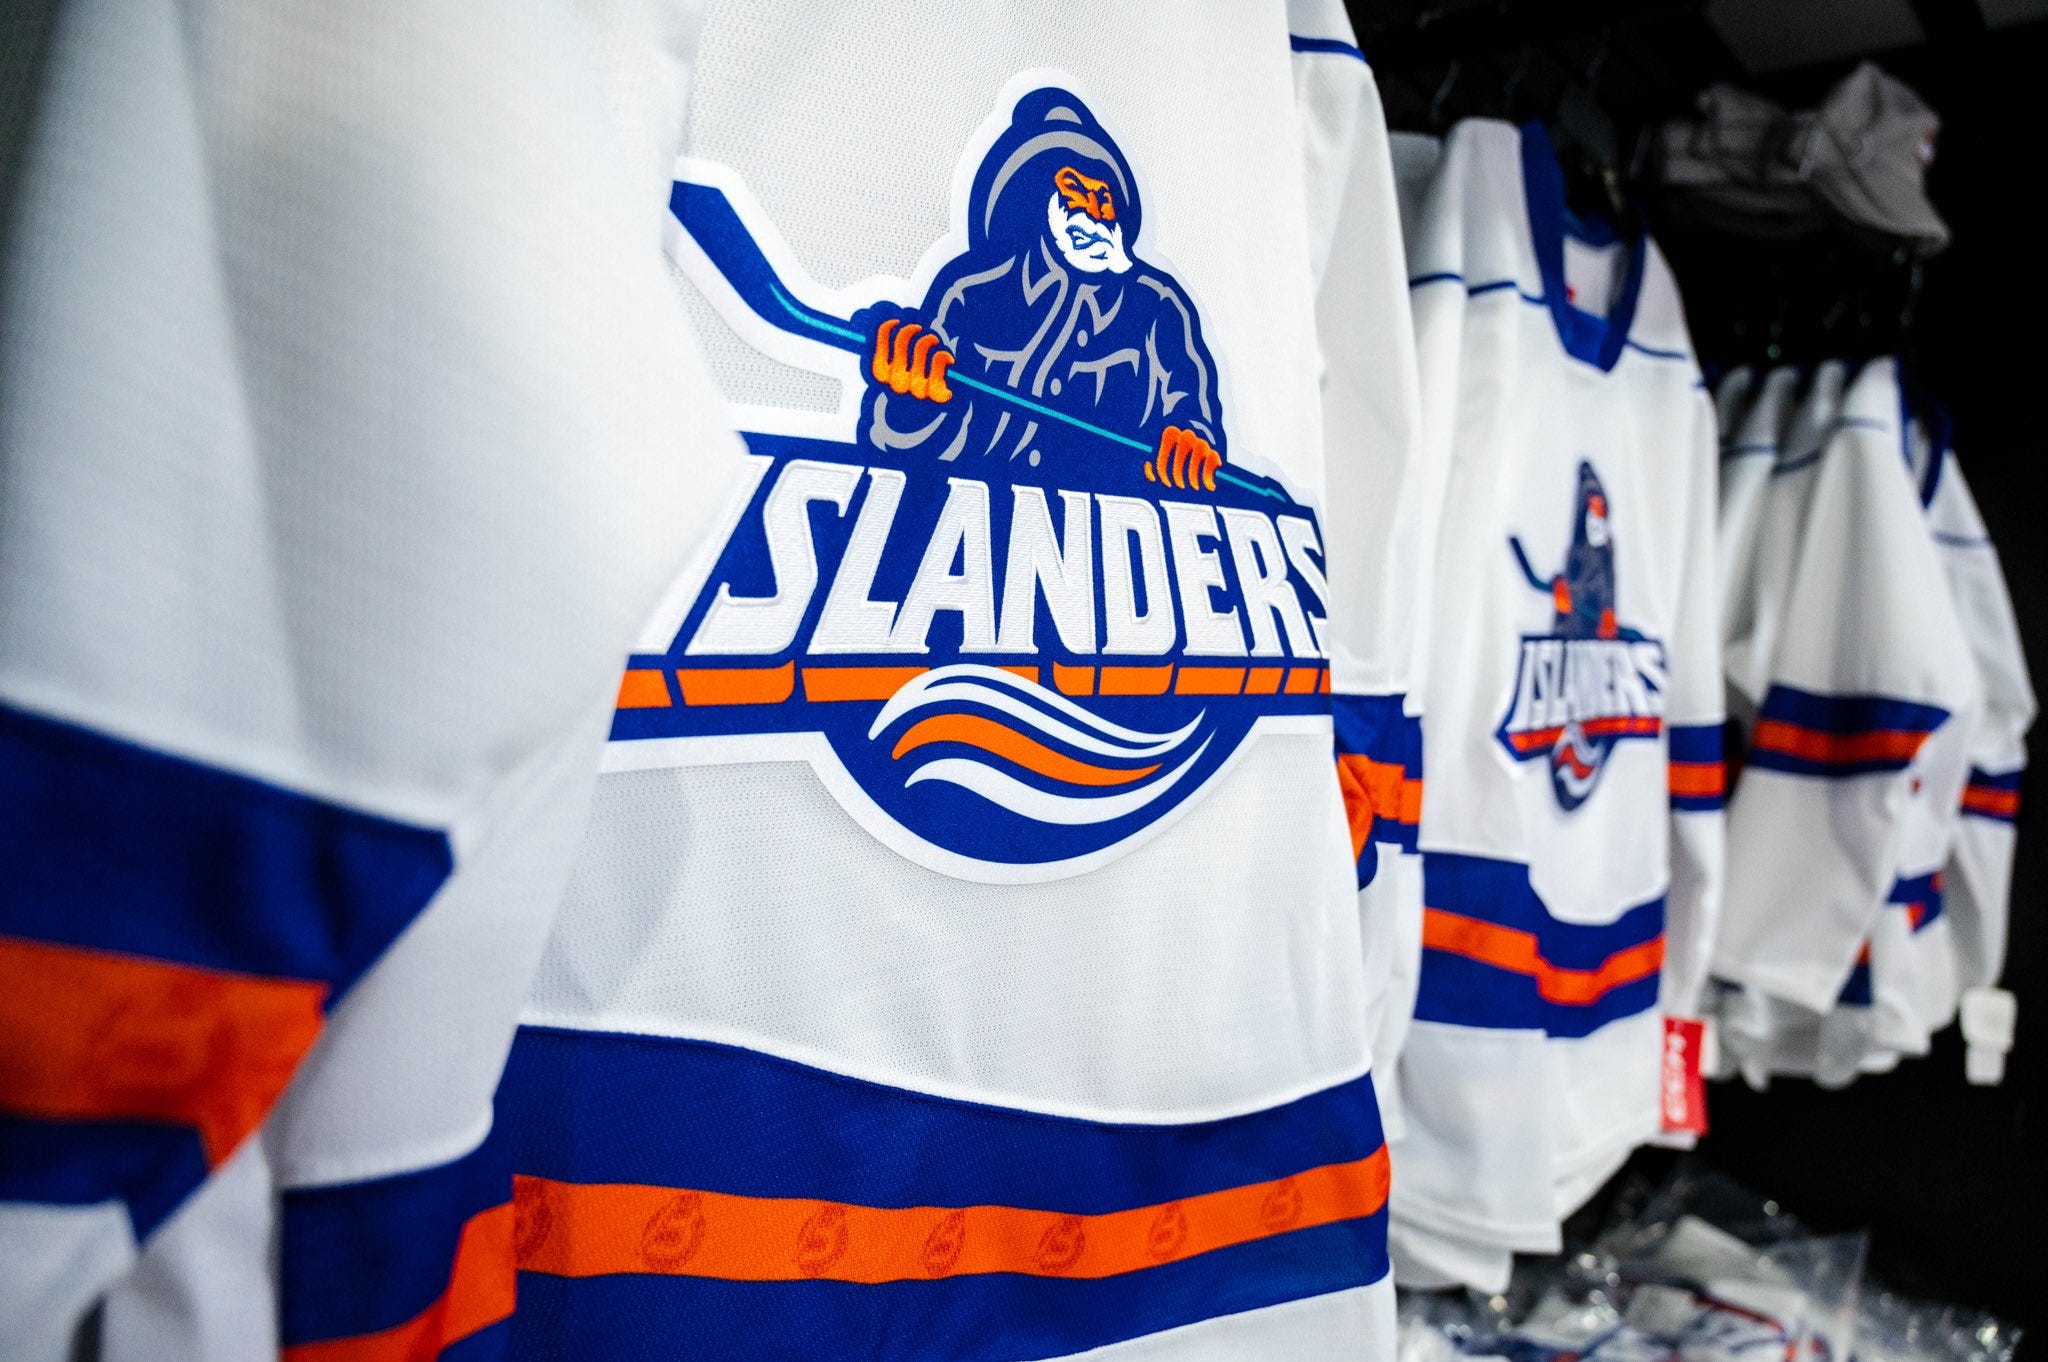 What do we think about the Bridgeport Islanders Fisherman sweater?